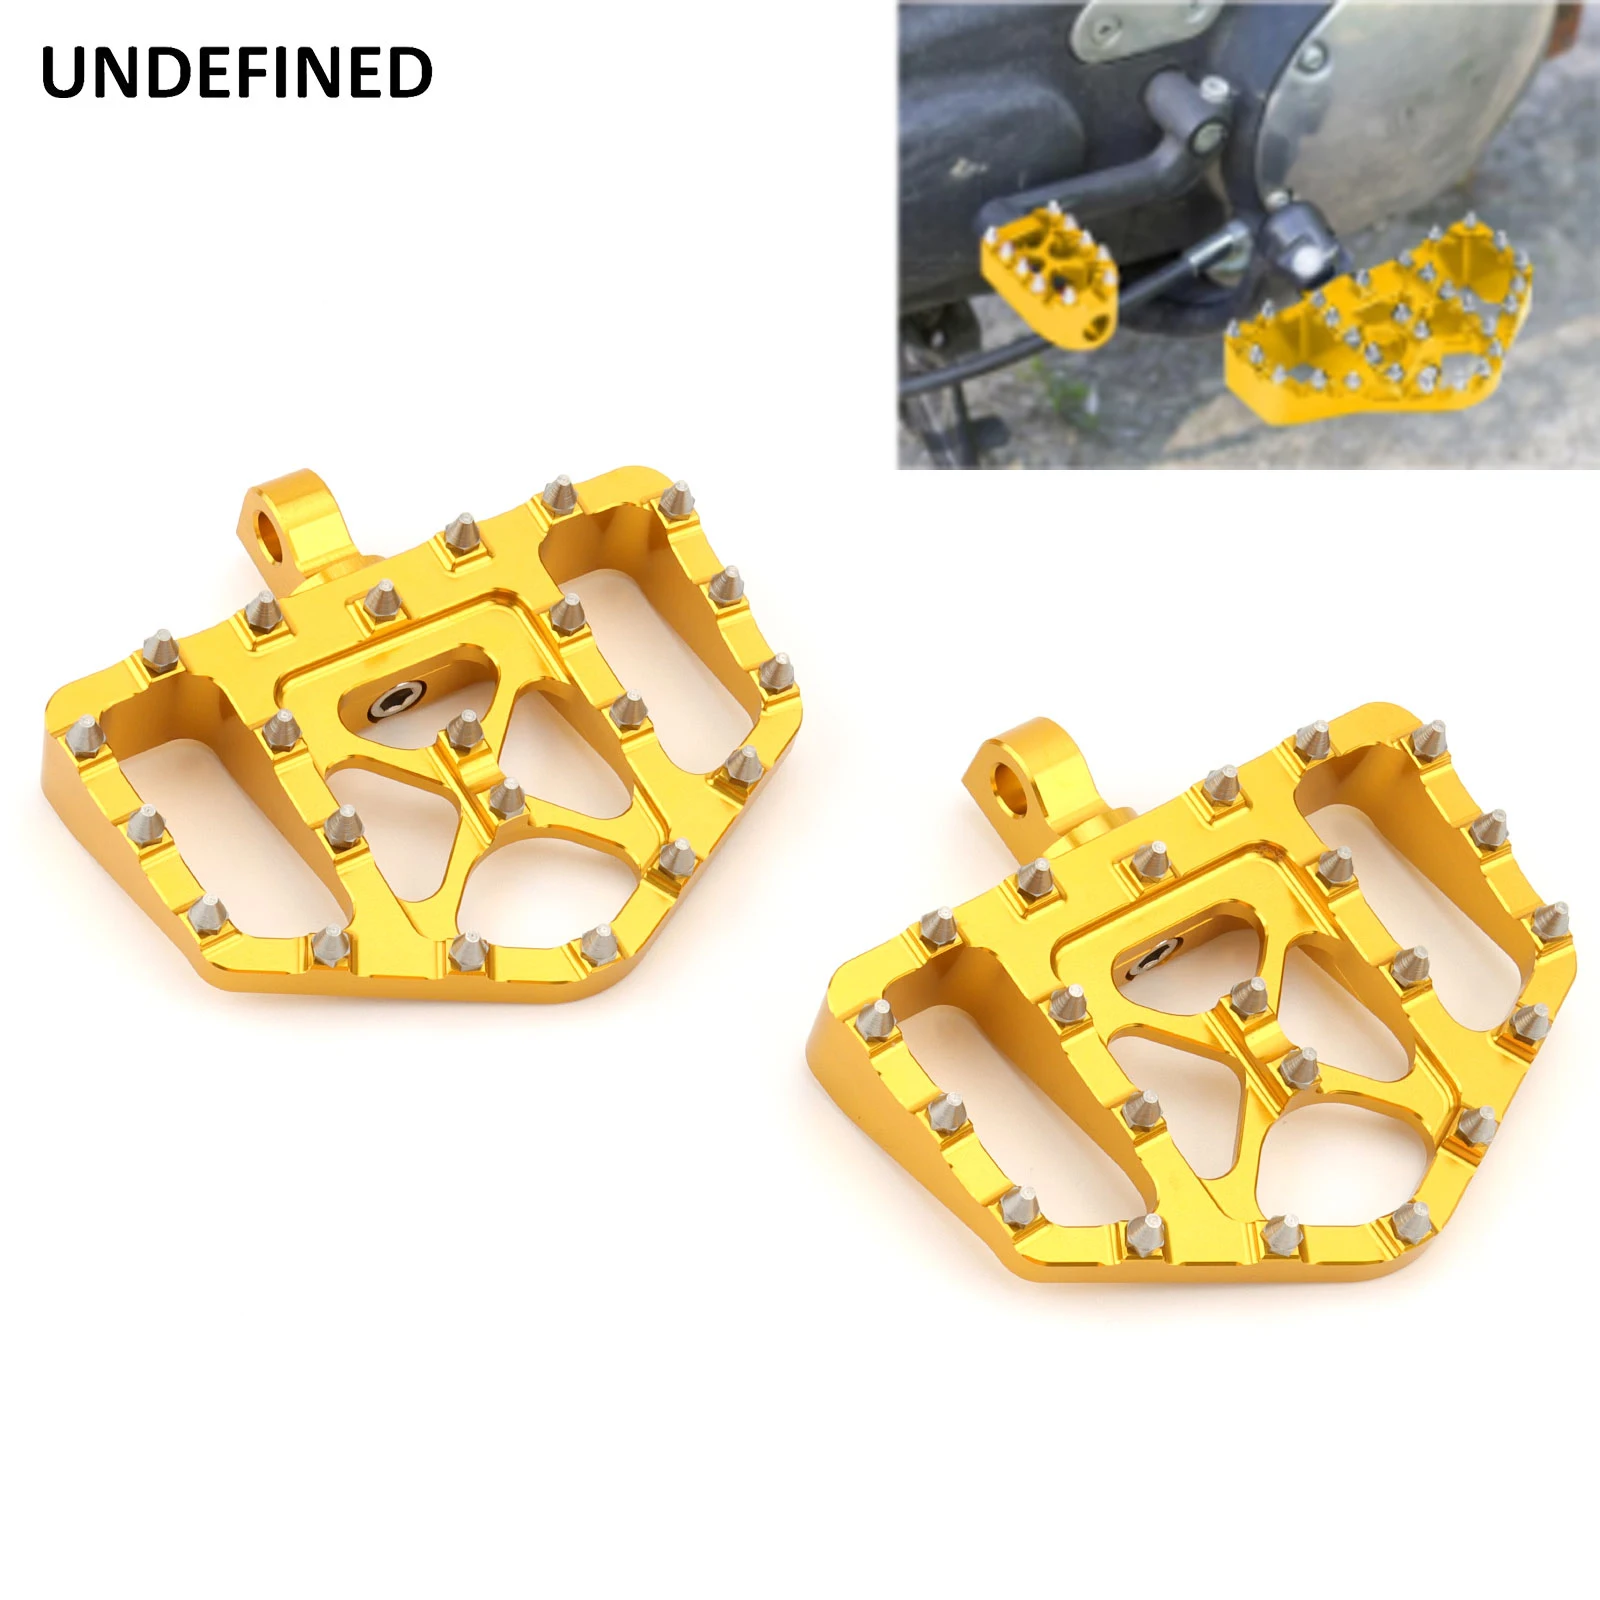 MX Foot Pegs Motorcycle Wide Fat Floorboards Chopper Footrests For Harley Dyna Sportster 883 1200 Softail Fatboy Street Bob Slim enlarge